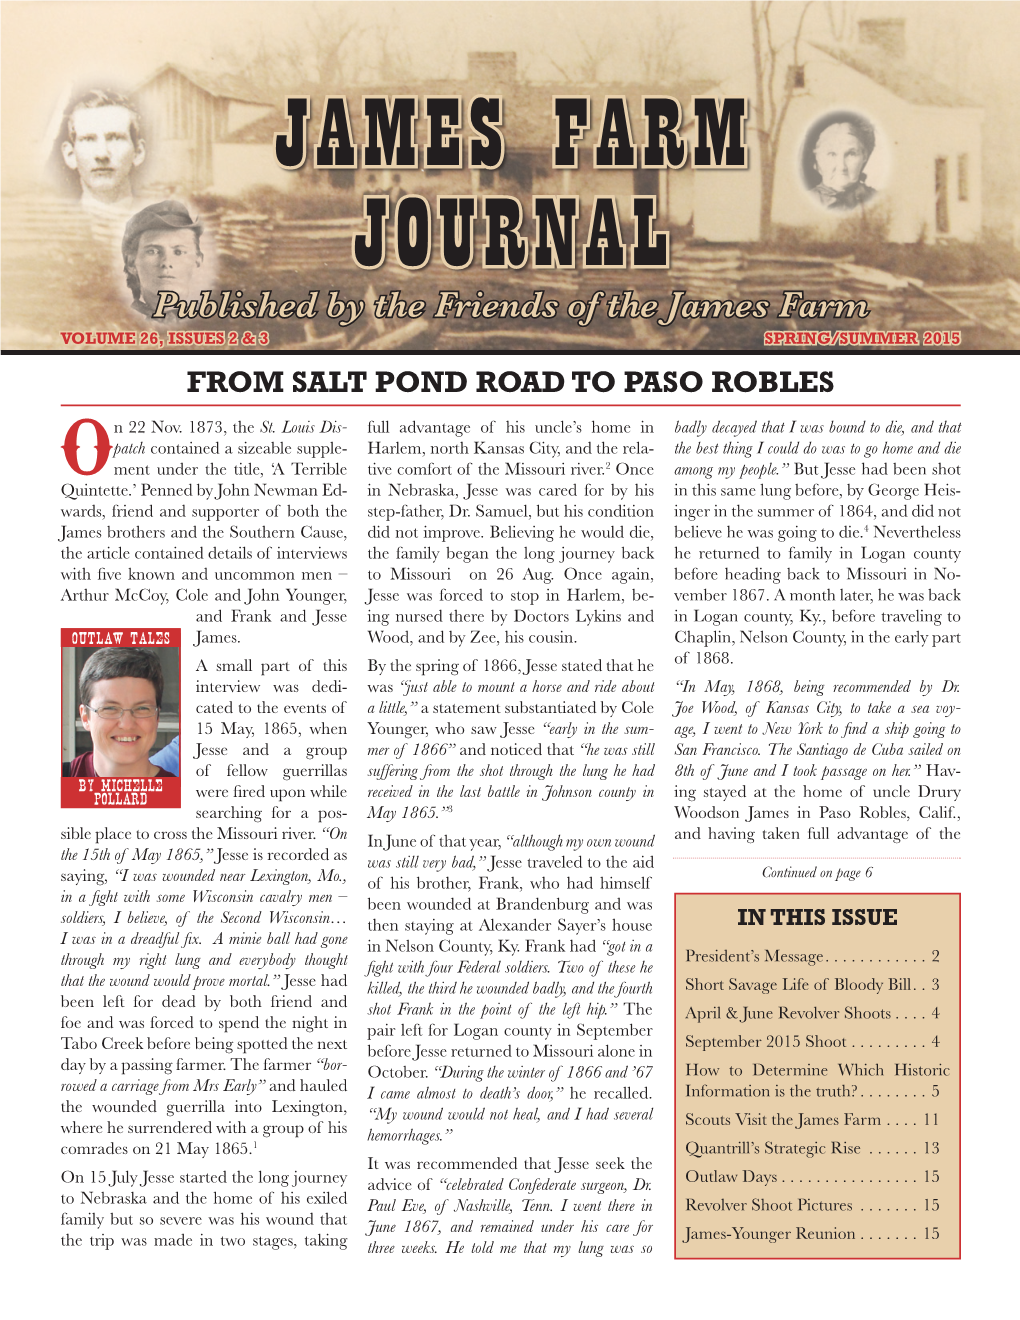 JAMES FARM JOURNAL Published by the Friends of the James Farm VOLUME 26, ISSUES 2 & 3 SPRING/SUMMER 2015 from SALT POND ROAD to PASO ROBLES